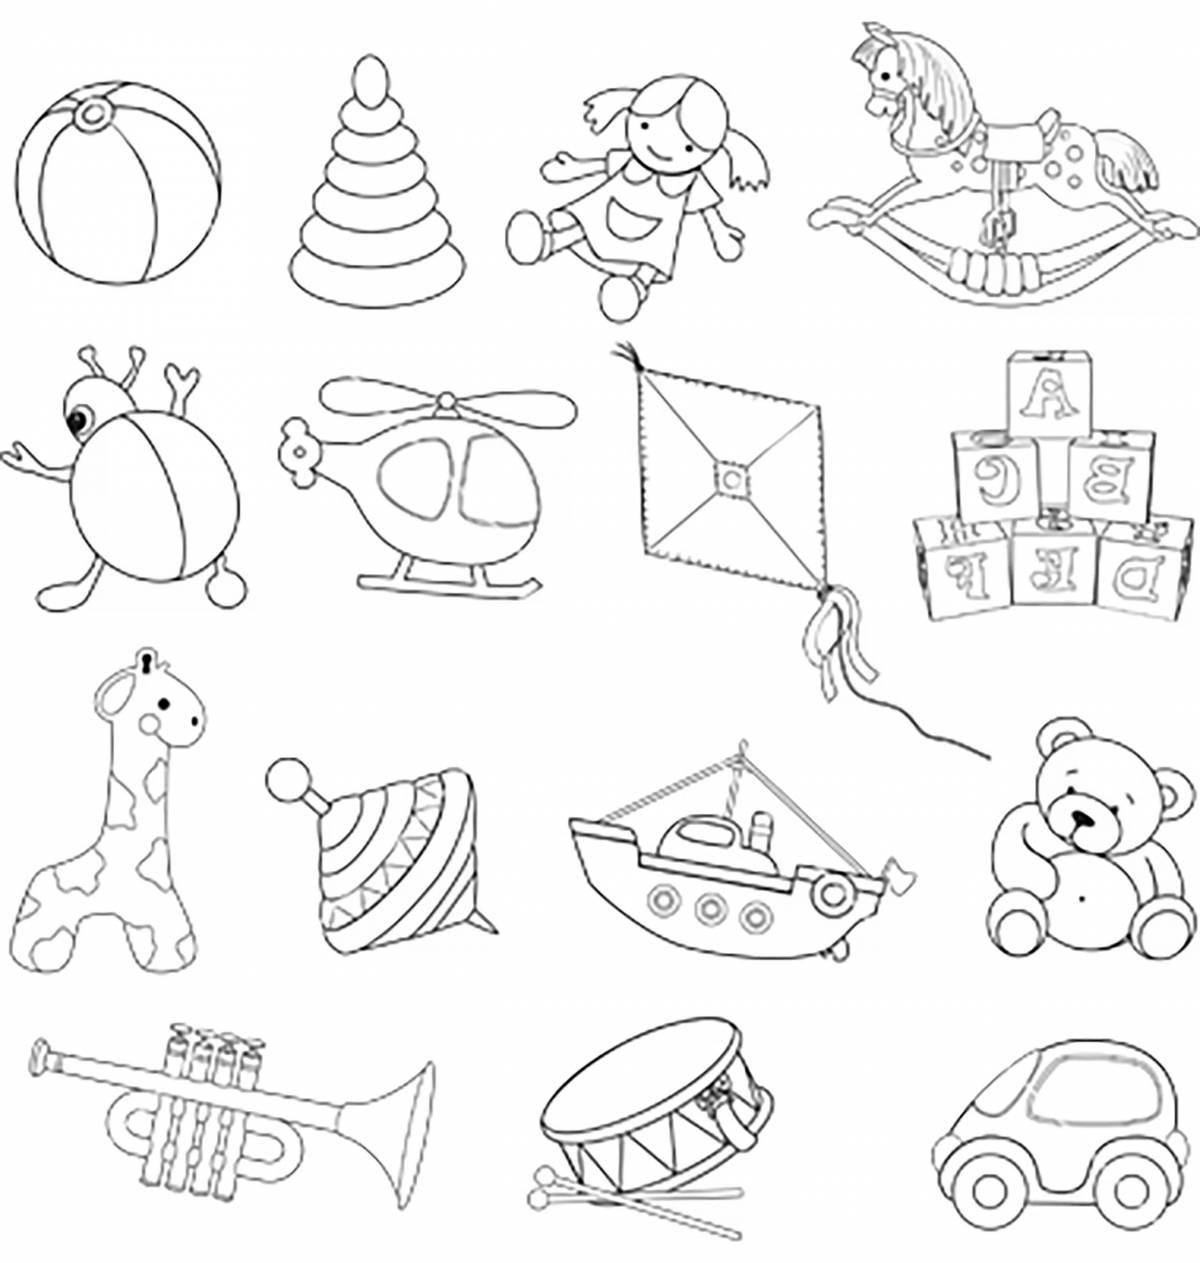 Toy factory coloring book